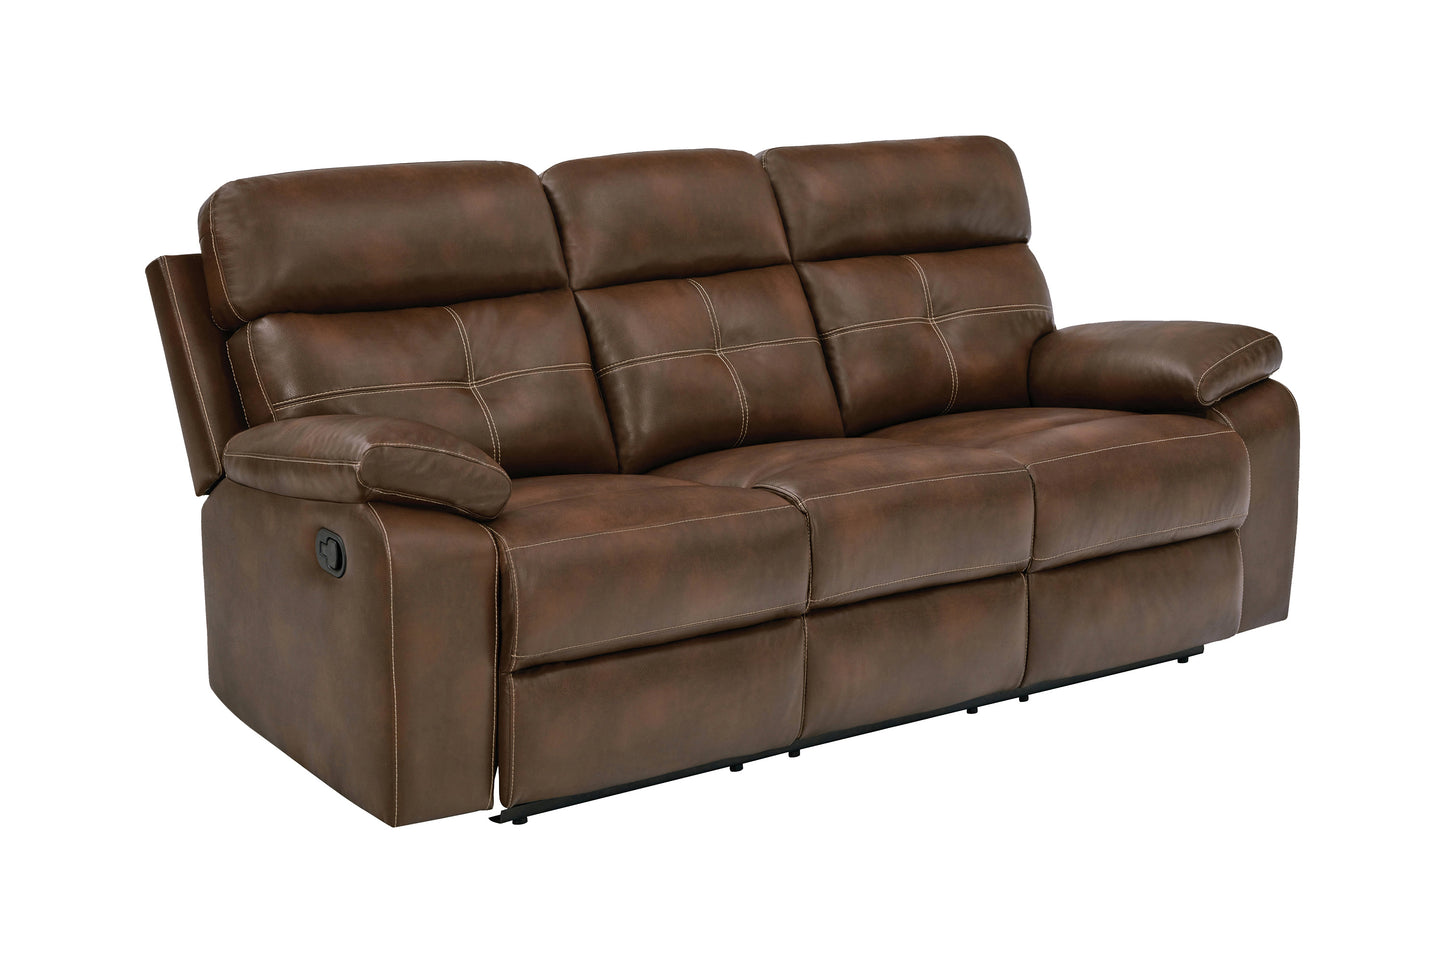 Damiano Upholstered Tufted Living Room Set Tri-Tone Brown - 601691